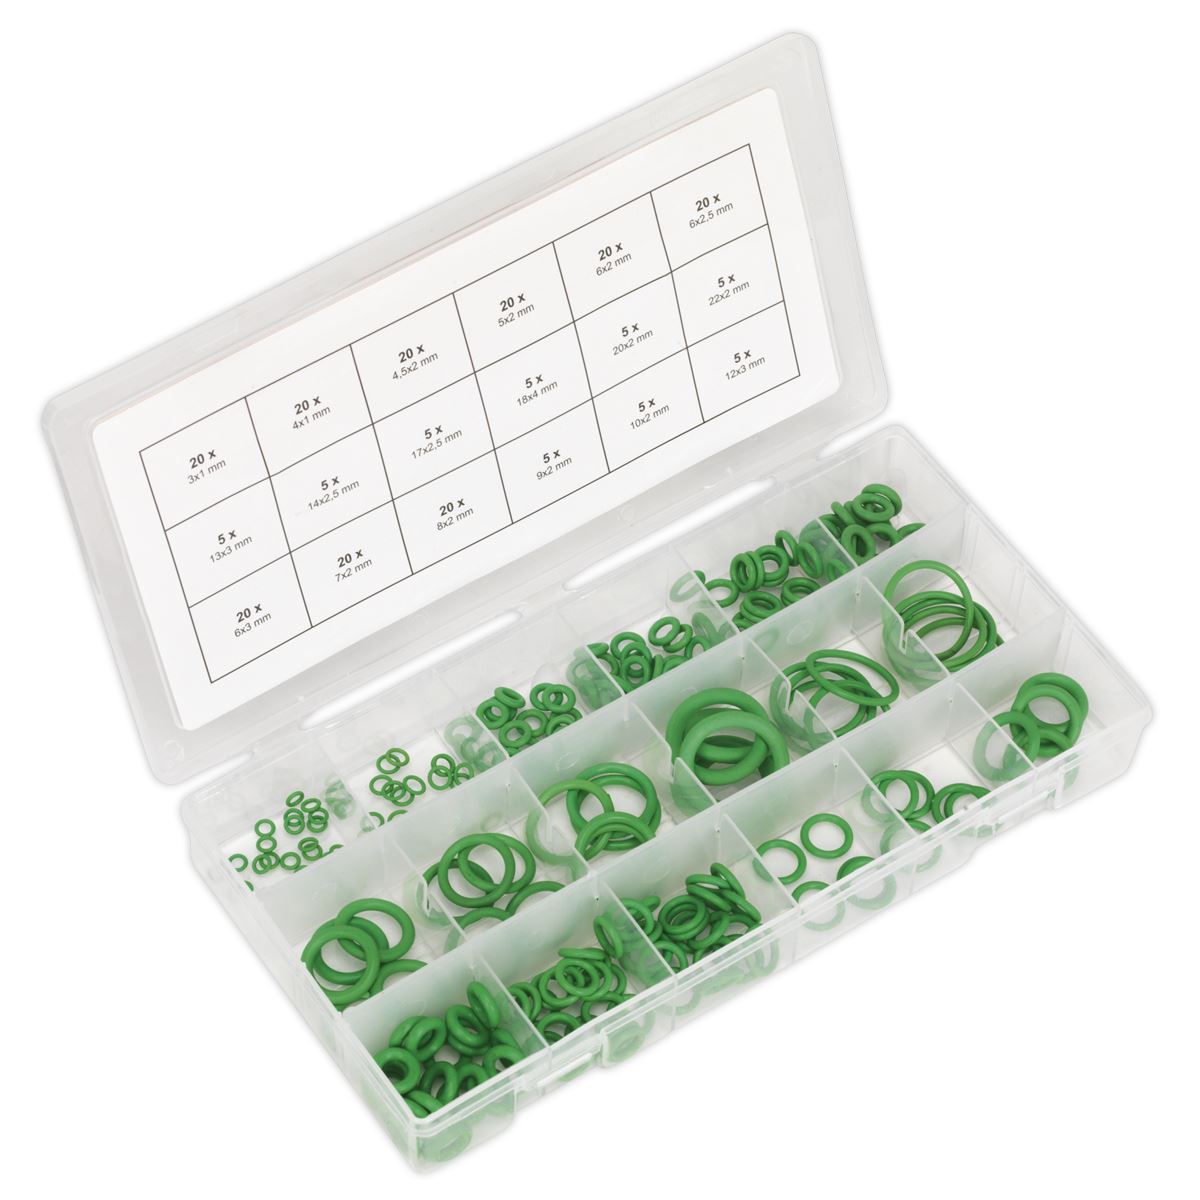 Sealey Air Conditioning Rubber O-Ring Assortment 225pc - Metric